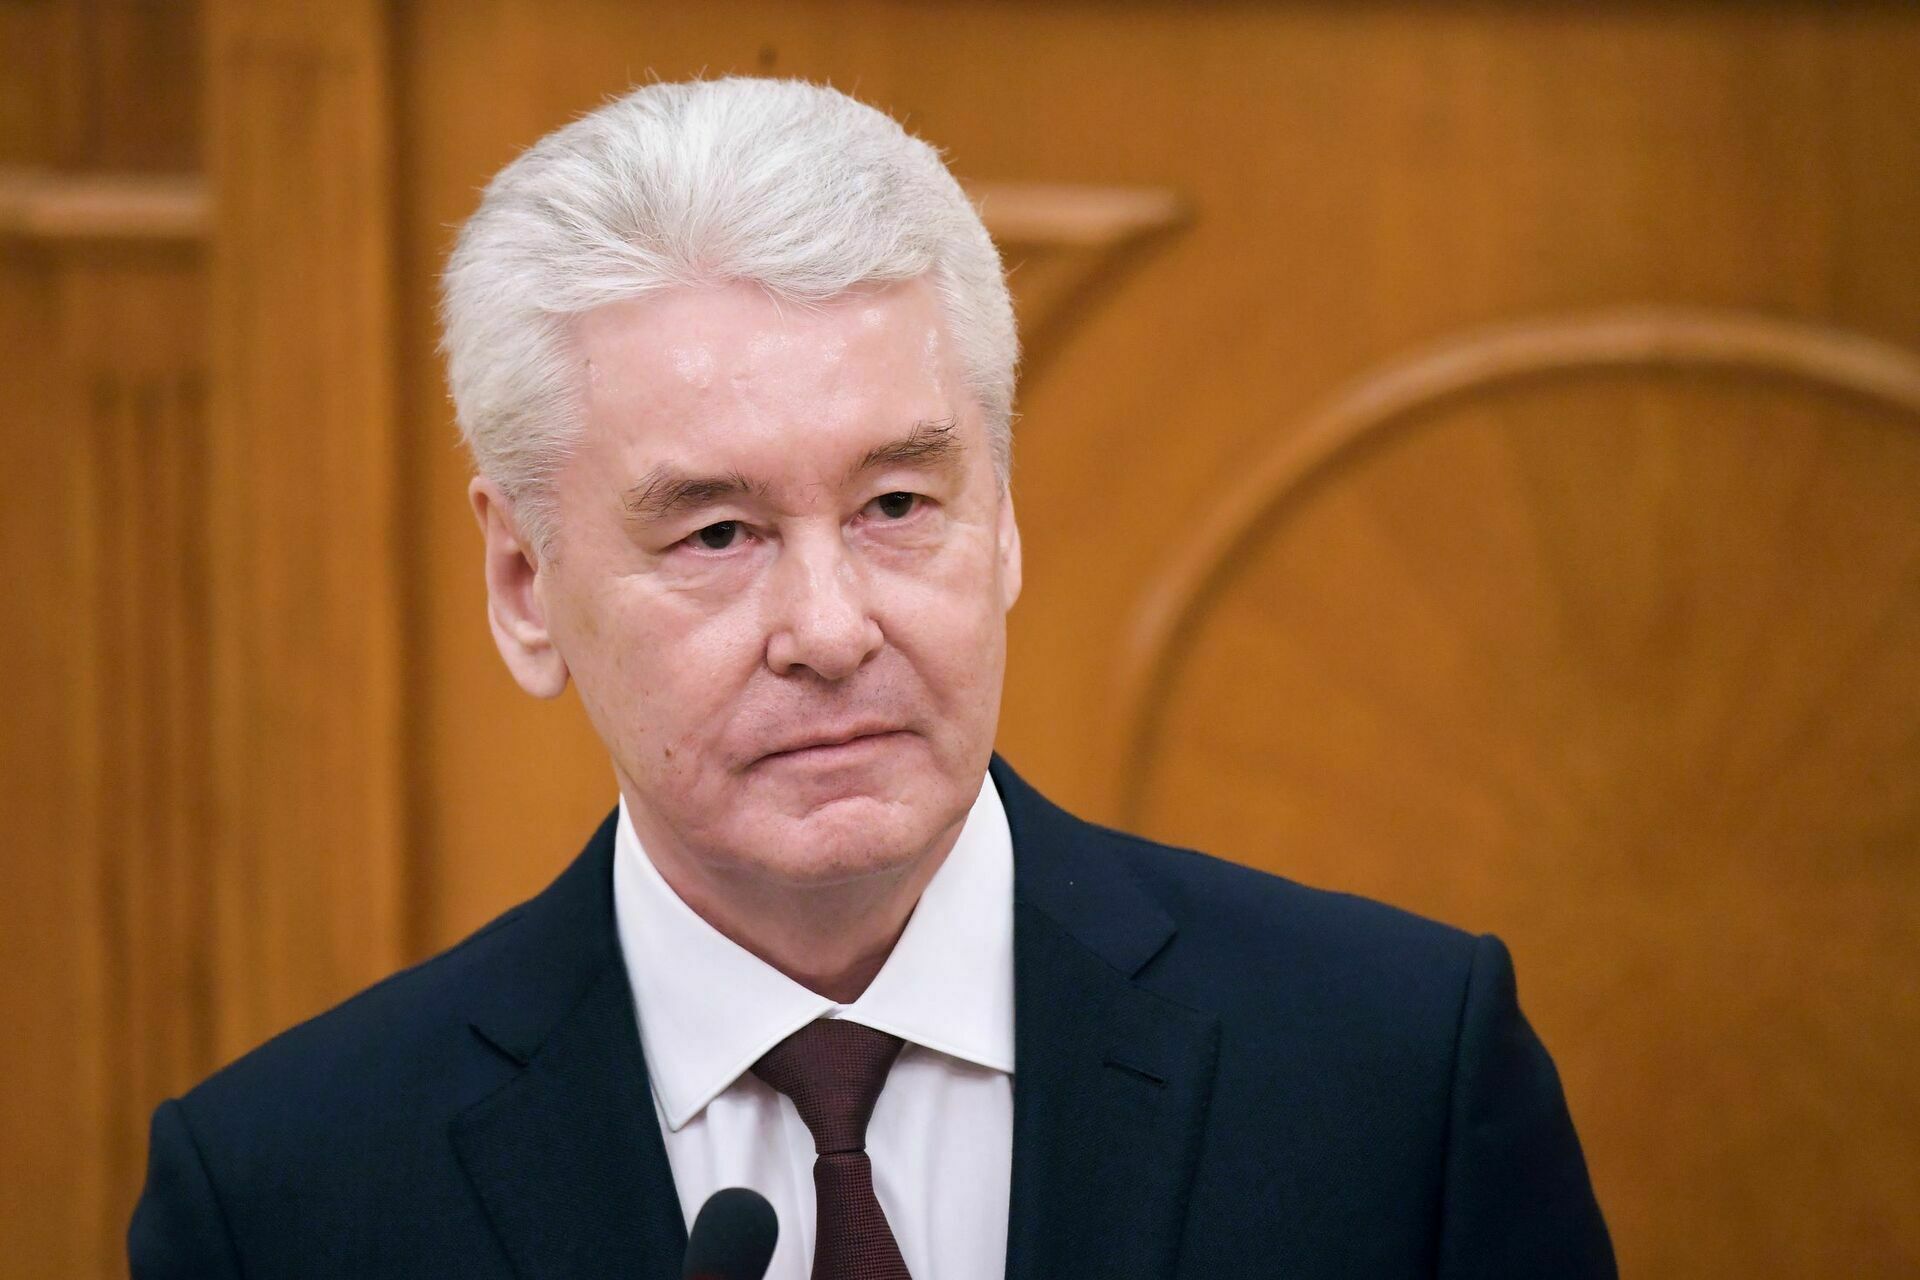 Sergey Sobyanin promised to expel migrants for violations of Russian laws